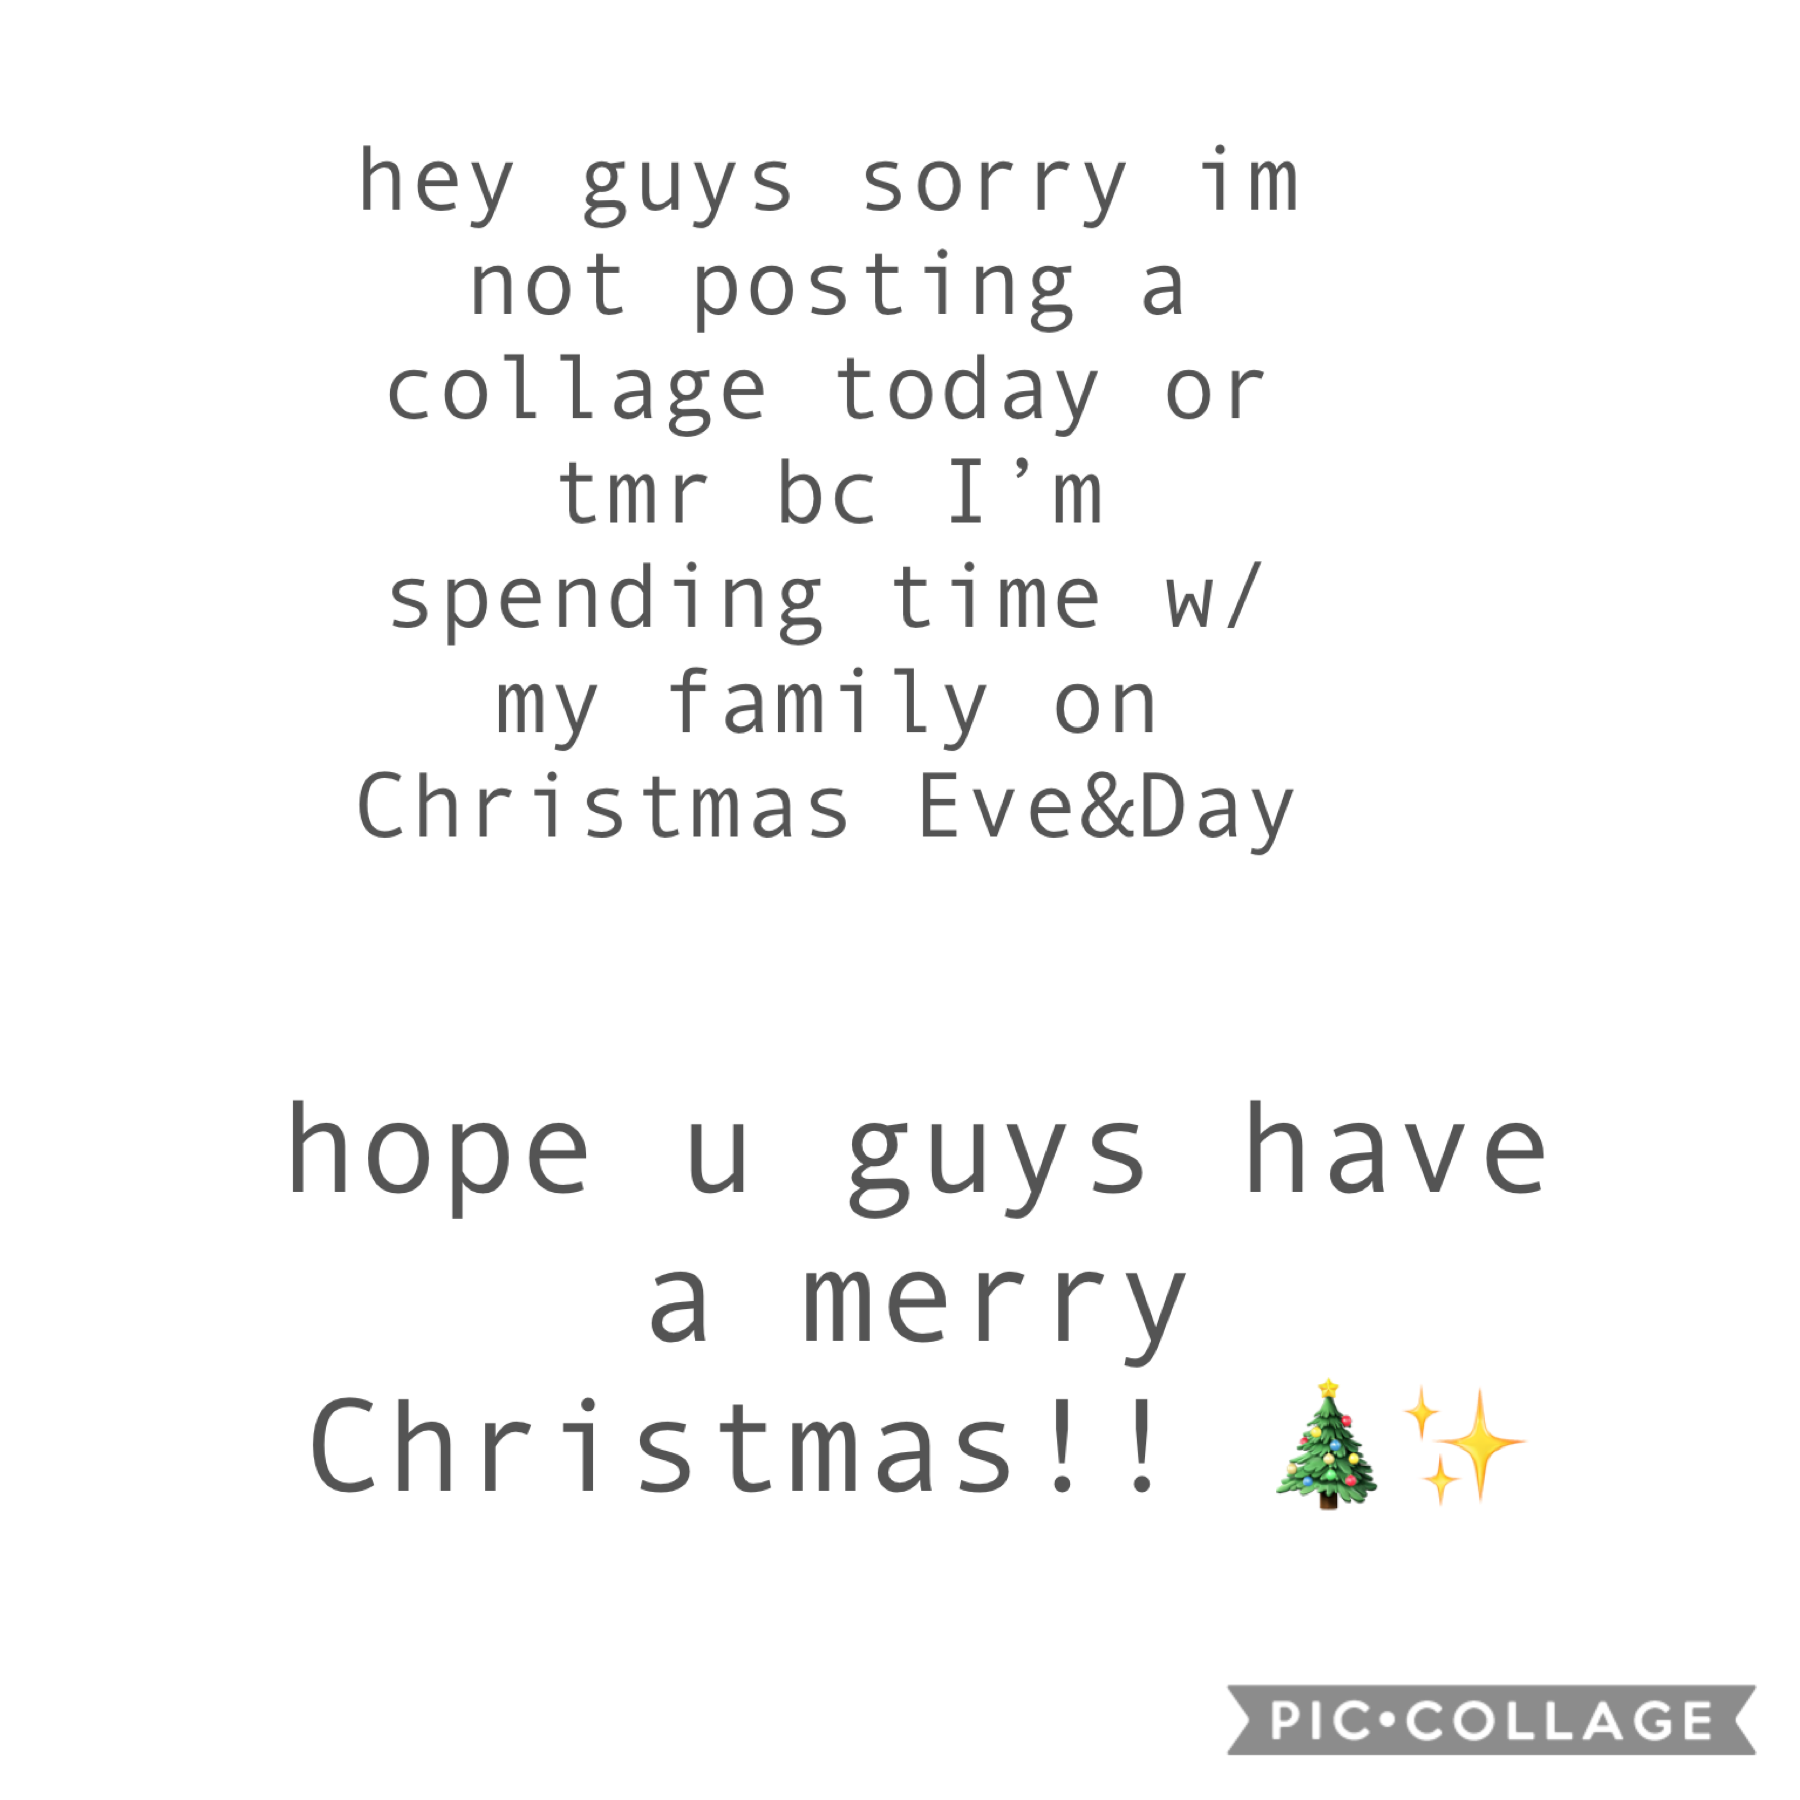 merry Christmas! 🎄
ily all ✨